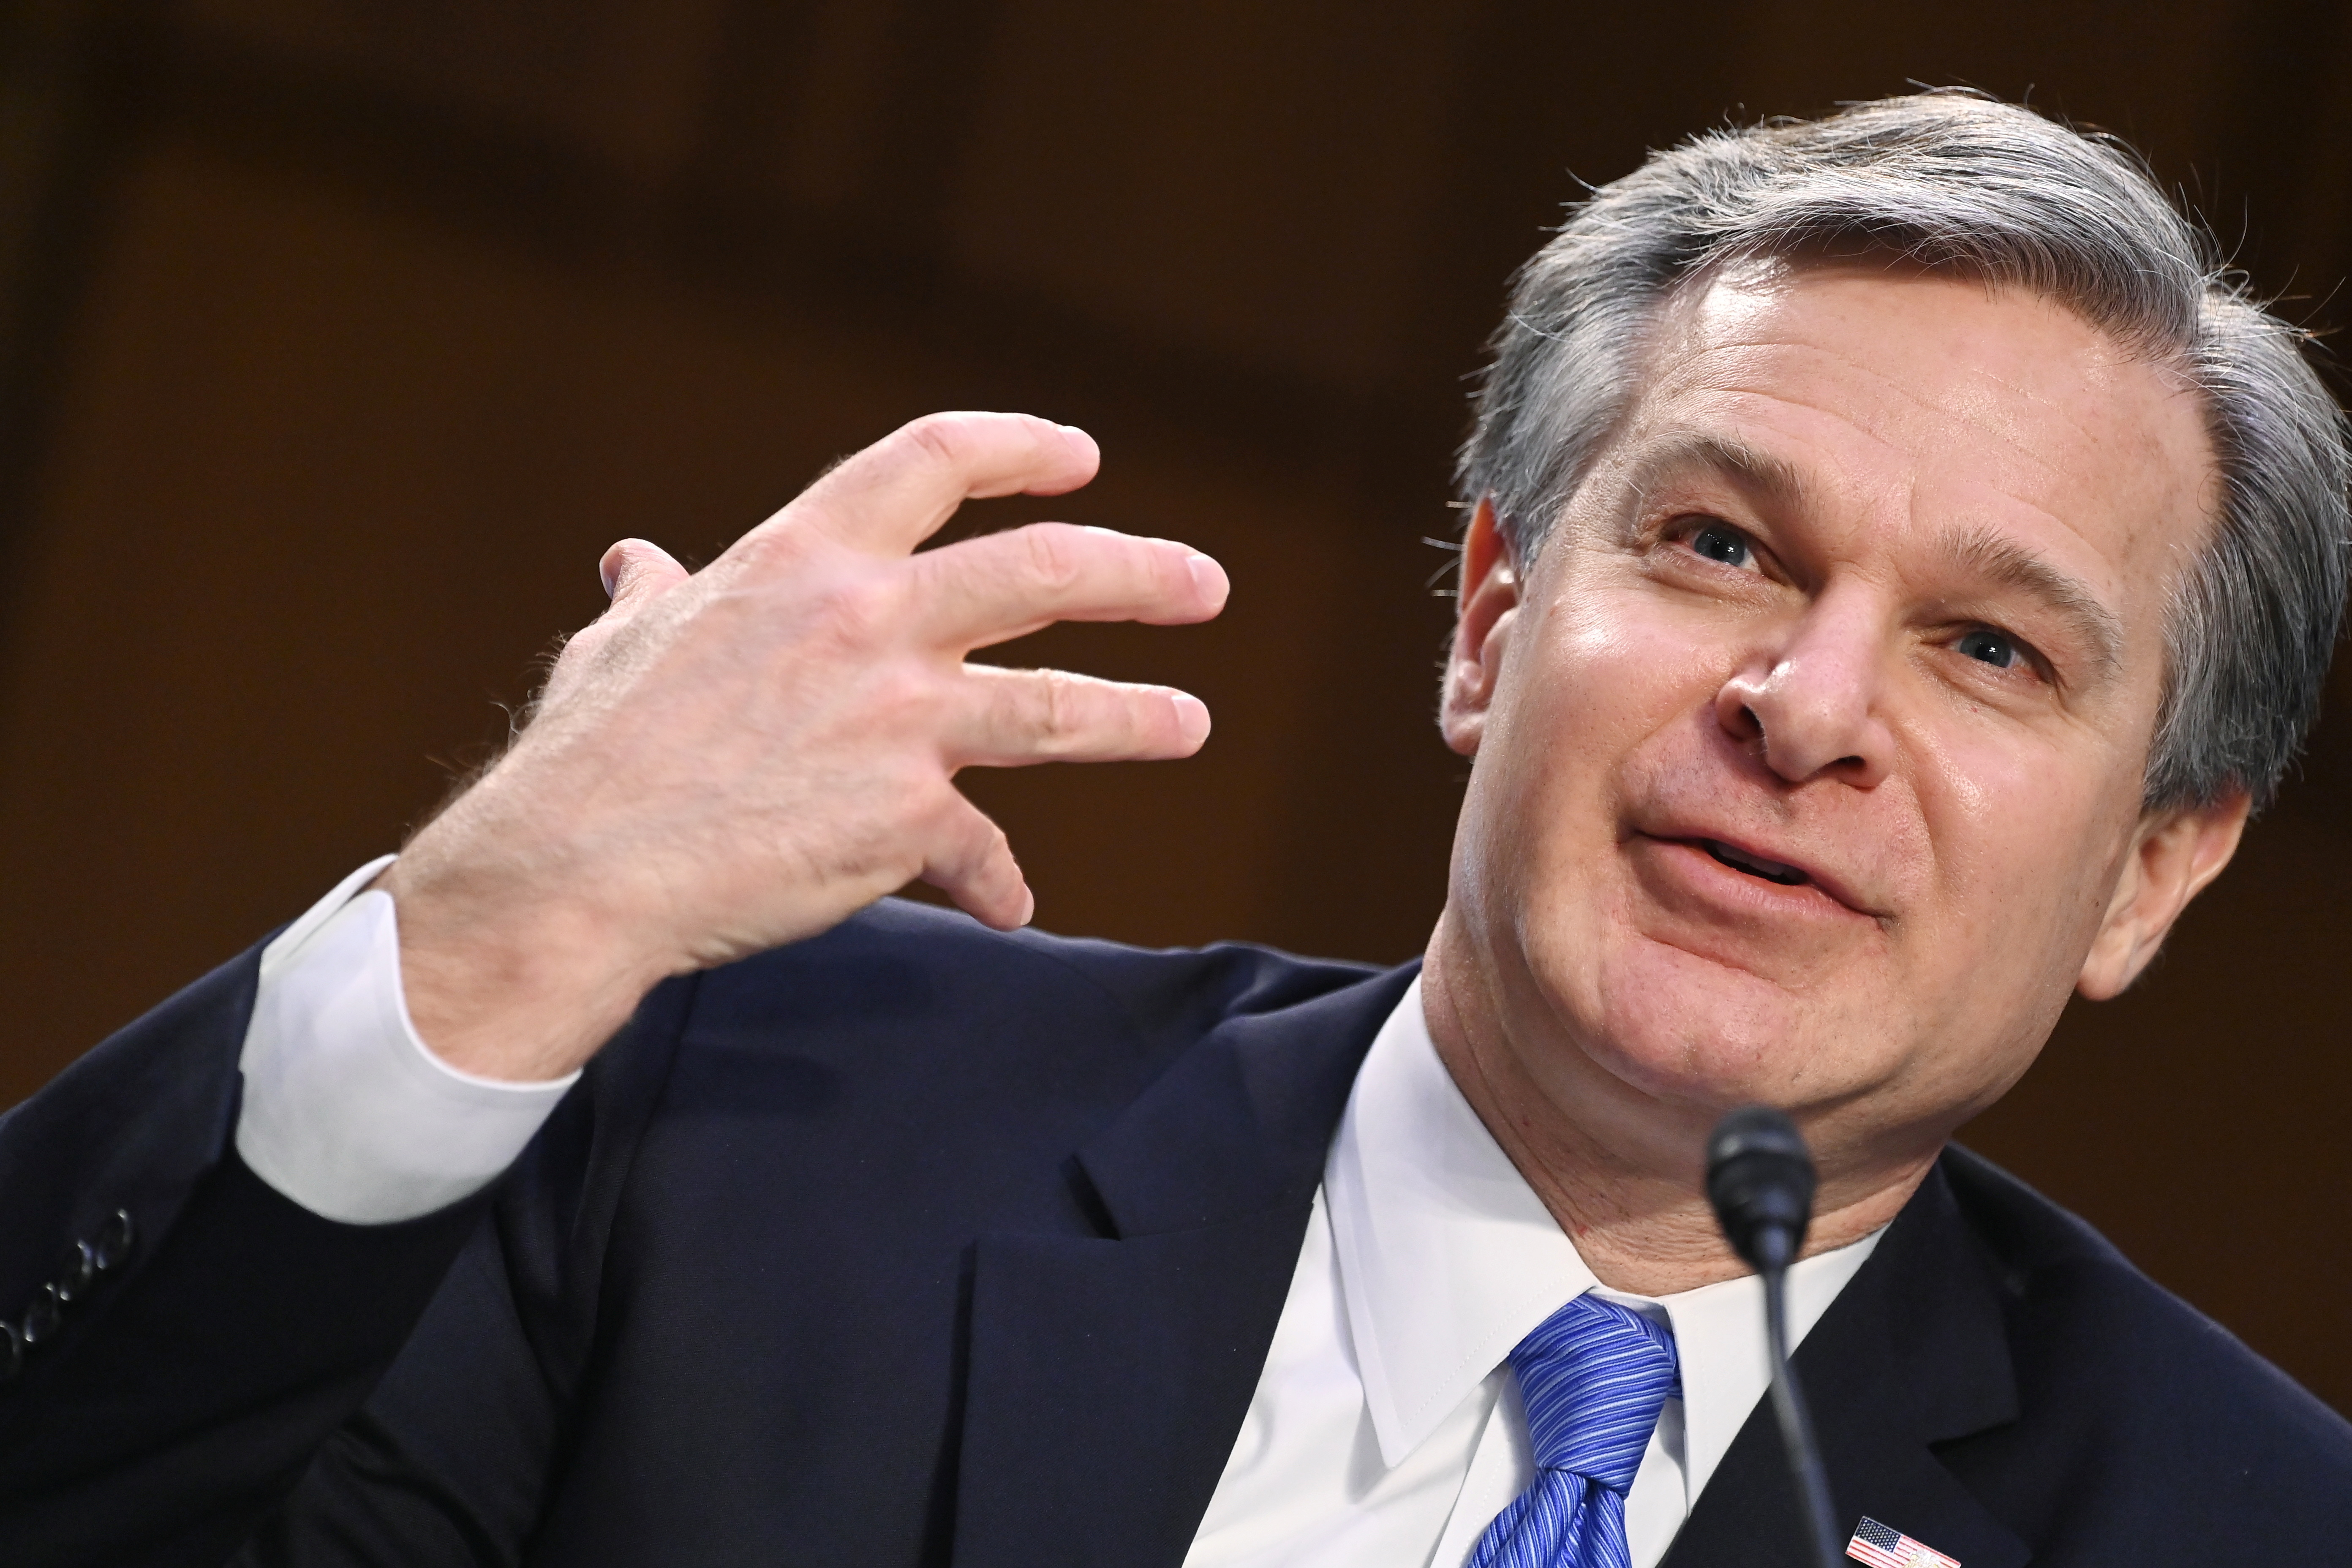 FBI director: Social media is 'key amplifier' of domestic extremism